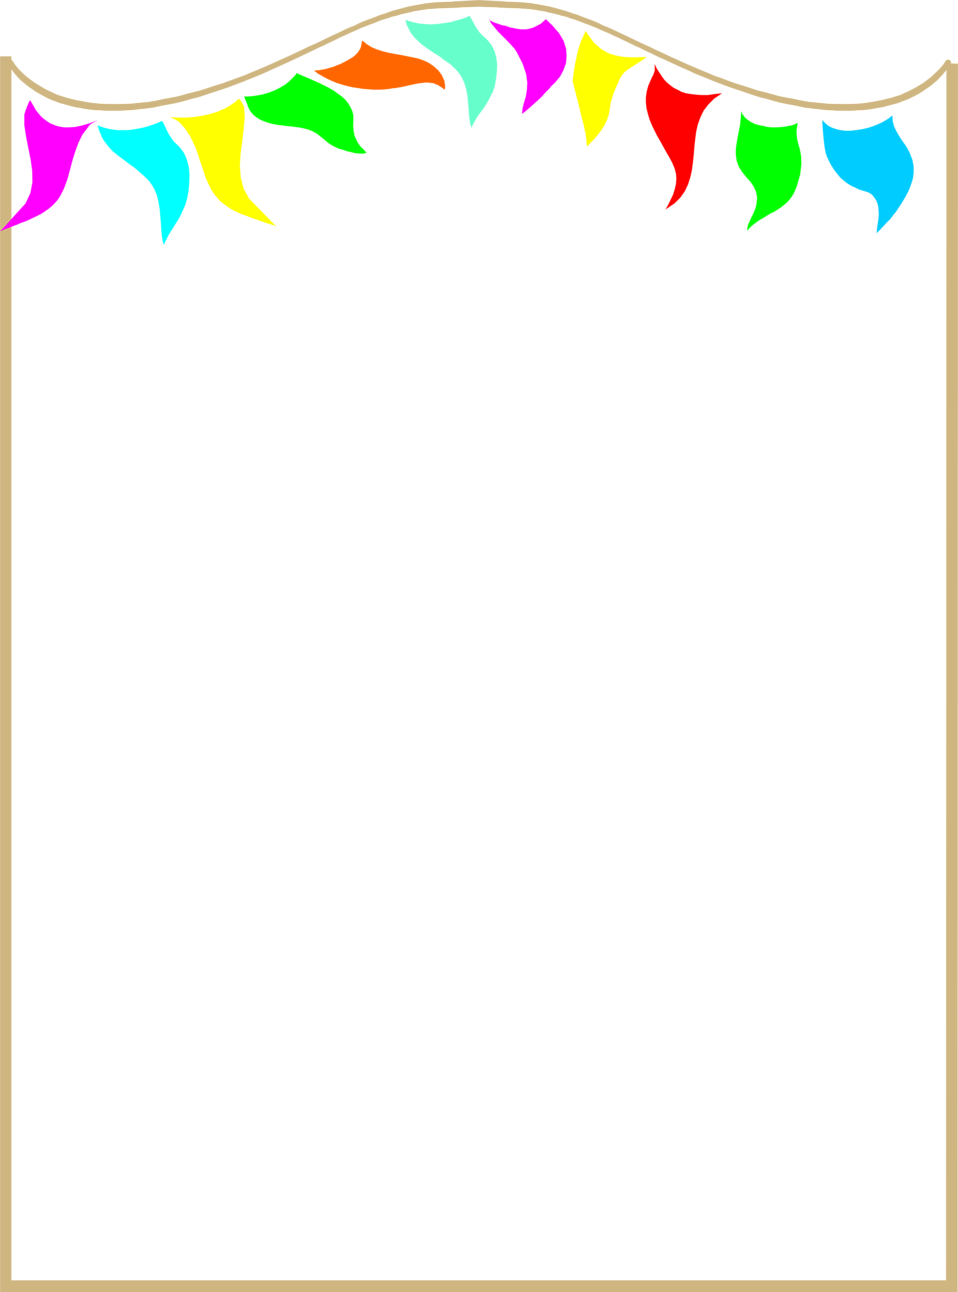 Pennant clipart party. Illustration of a blank